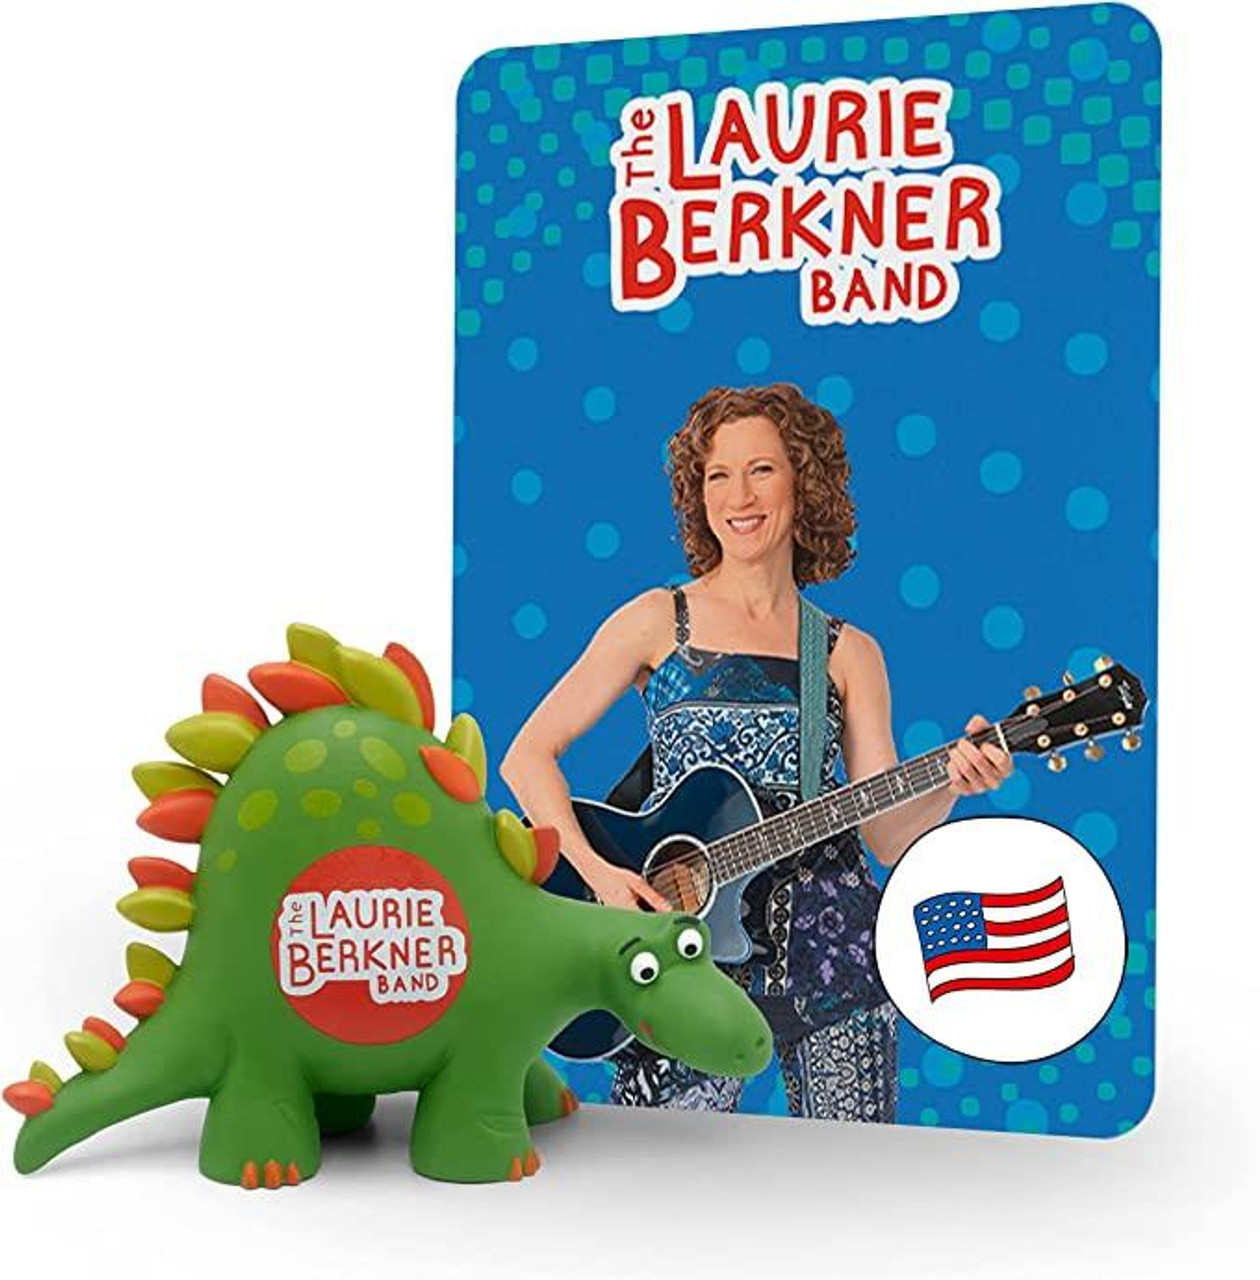 Laurie Berkner Band - DIY Lego Storage Containers